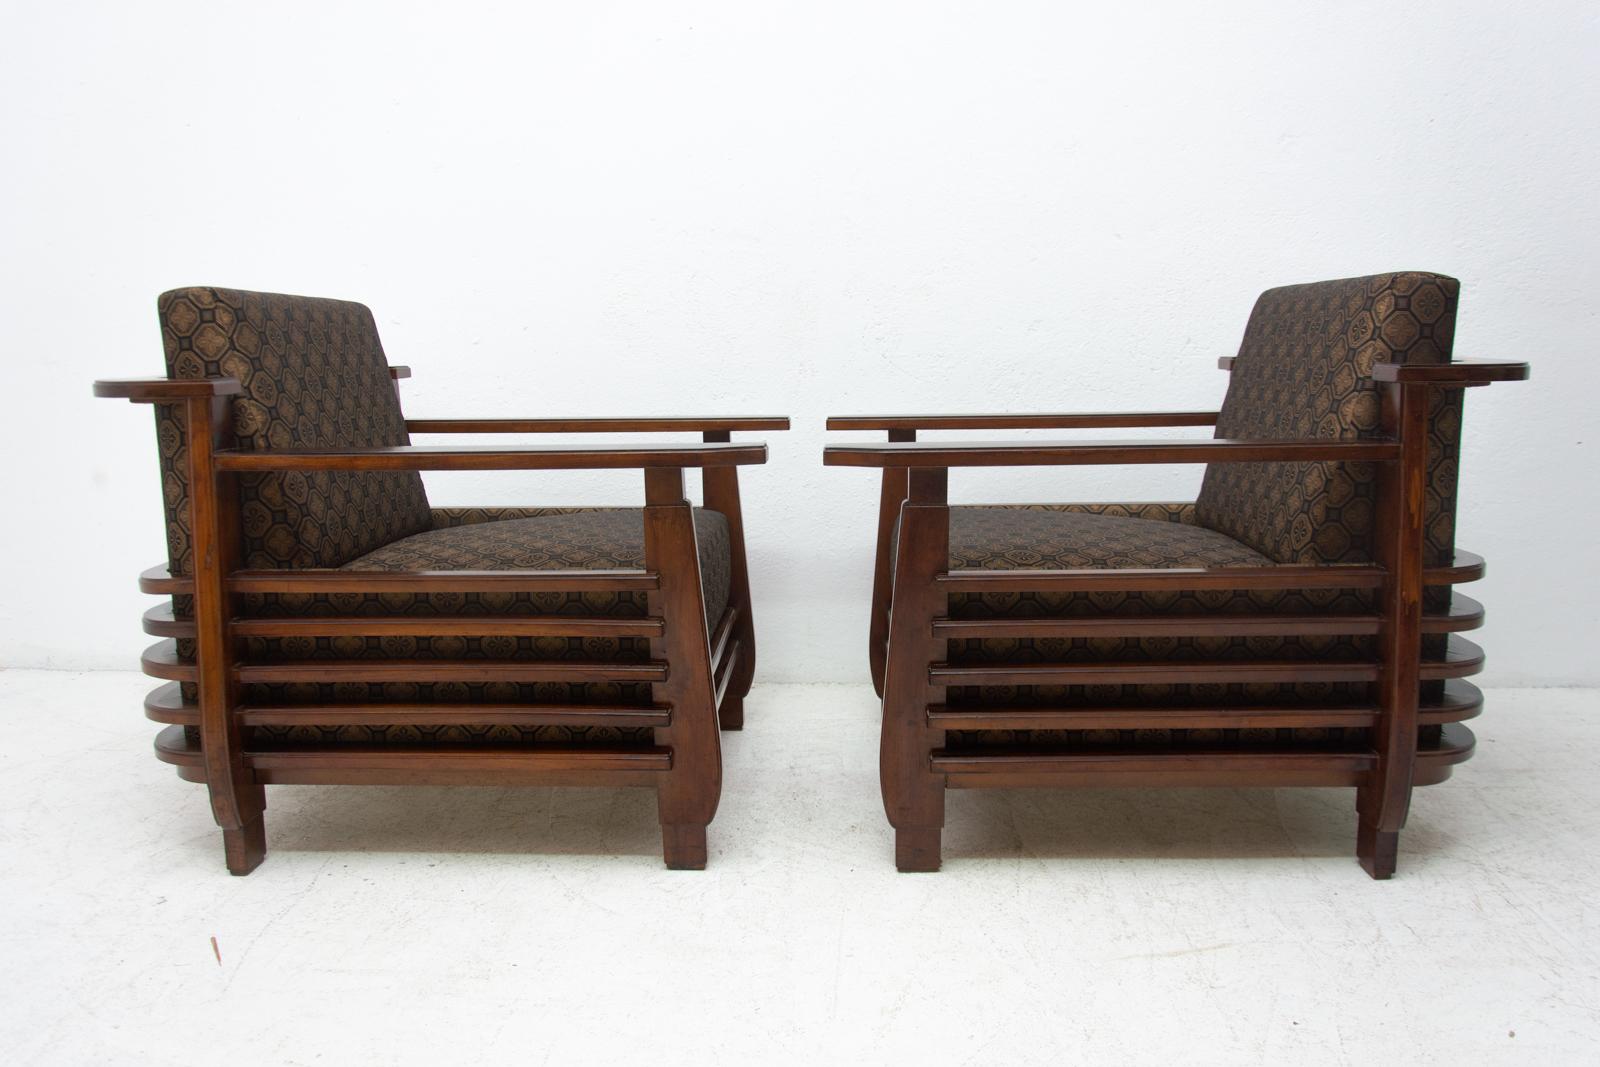 Pair of Fully Restored Functionalist Armchairs, 1930s, Austria, Bauhaus Period For Sale 1